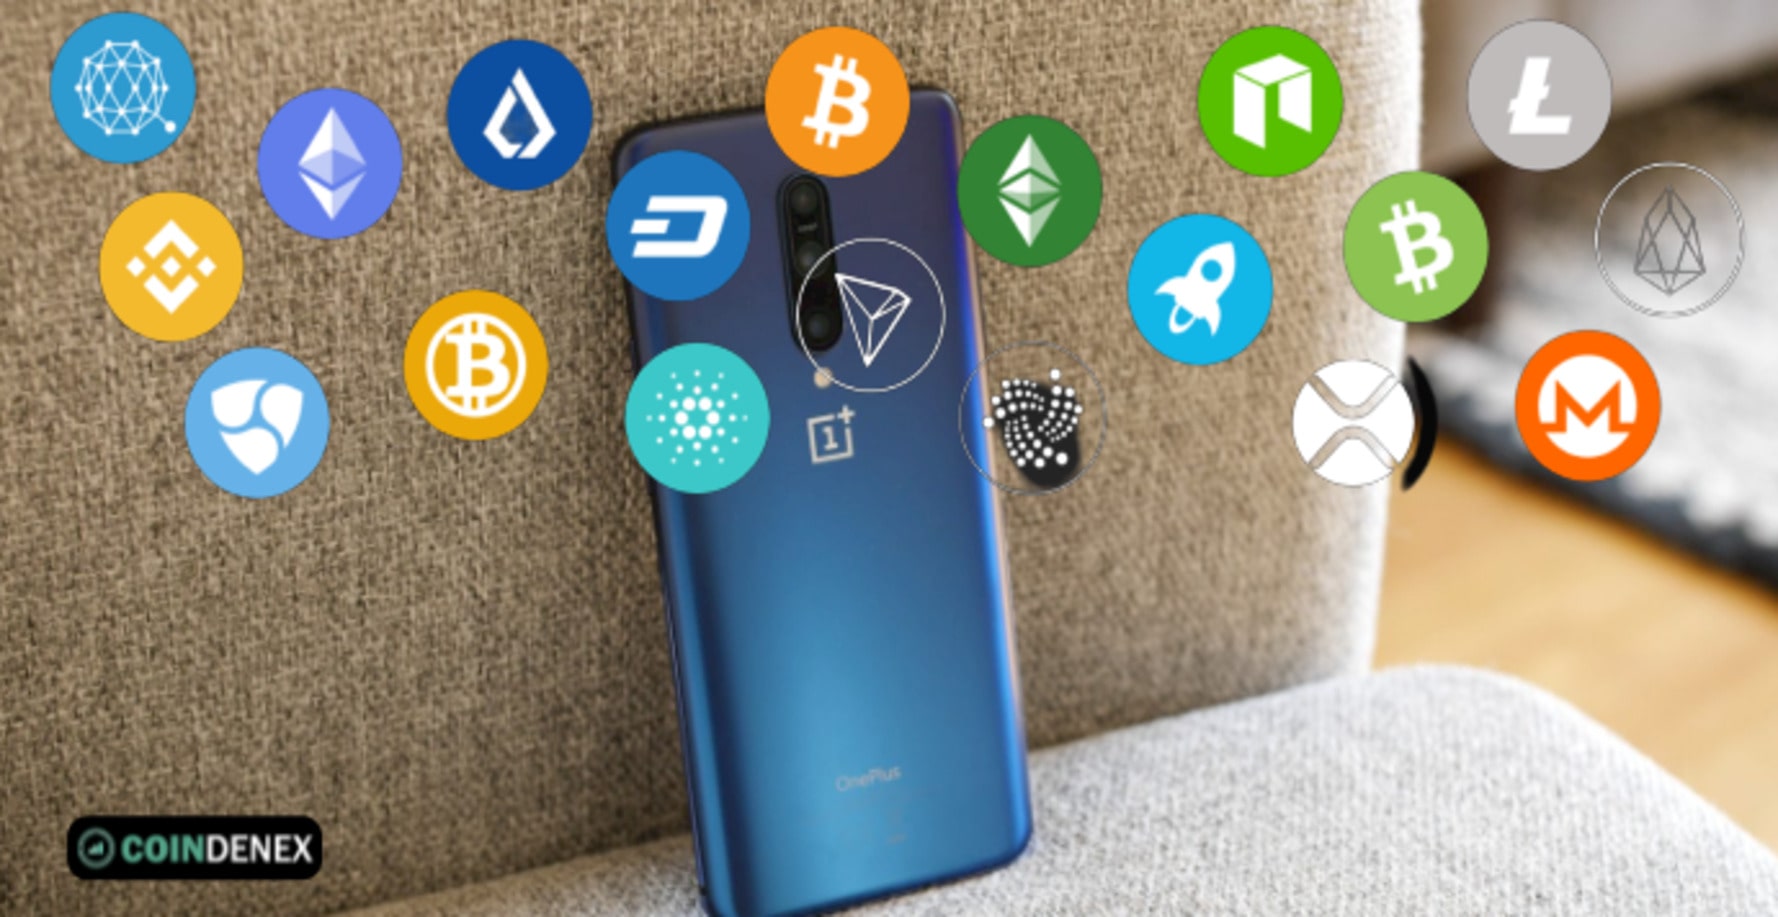 OnePlus cryptocurrency wallet company survey suggests